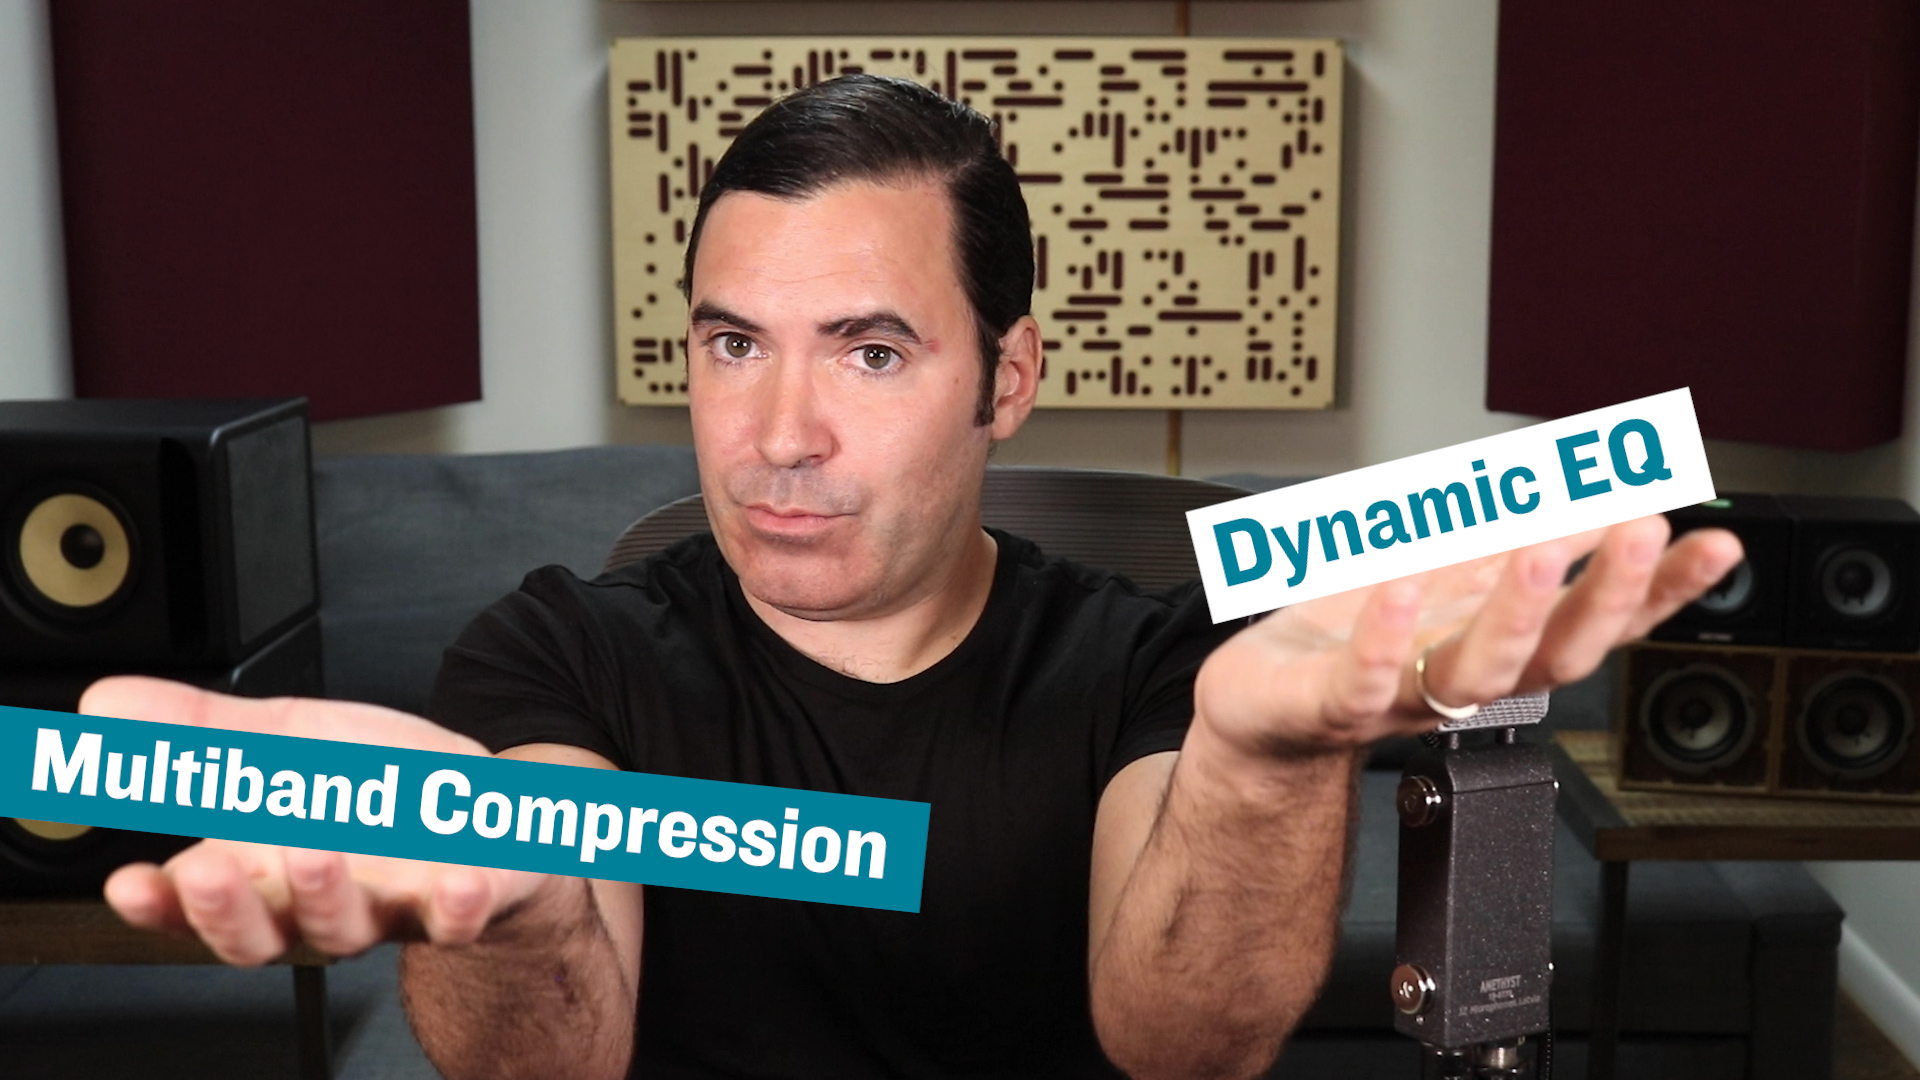 Multiband Compression Vs. Dynamic EQ: What’s the Difference?